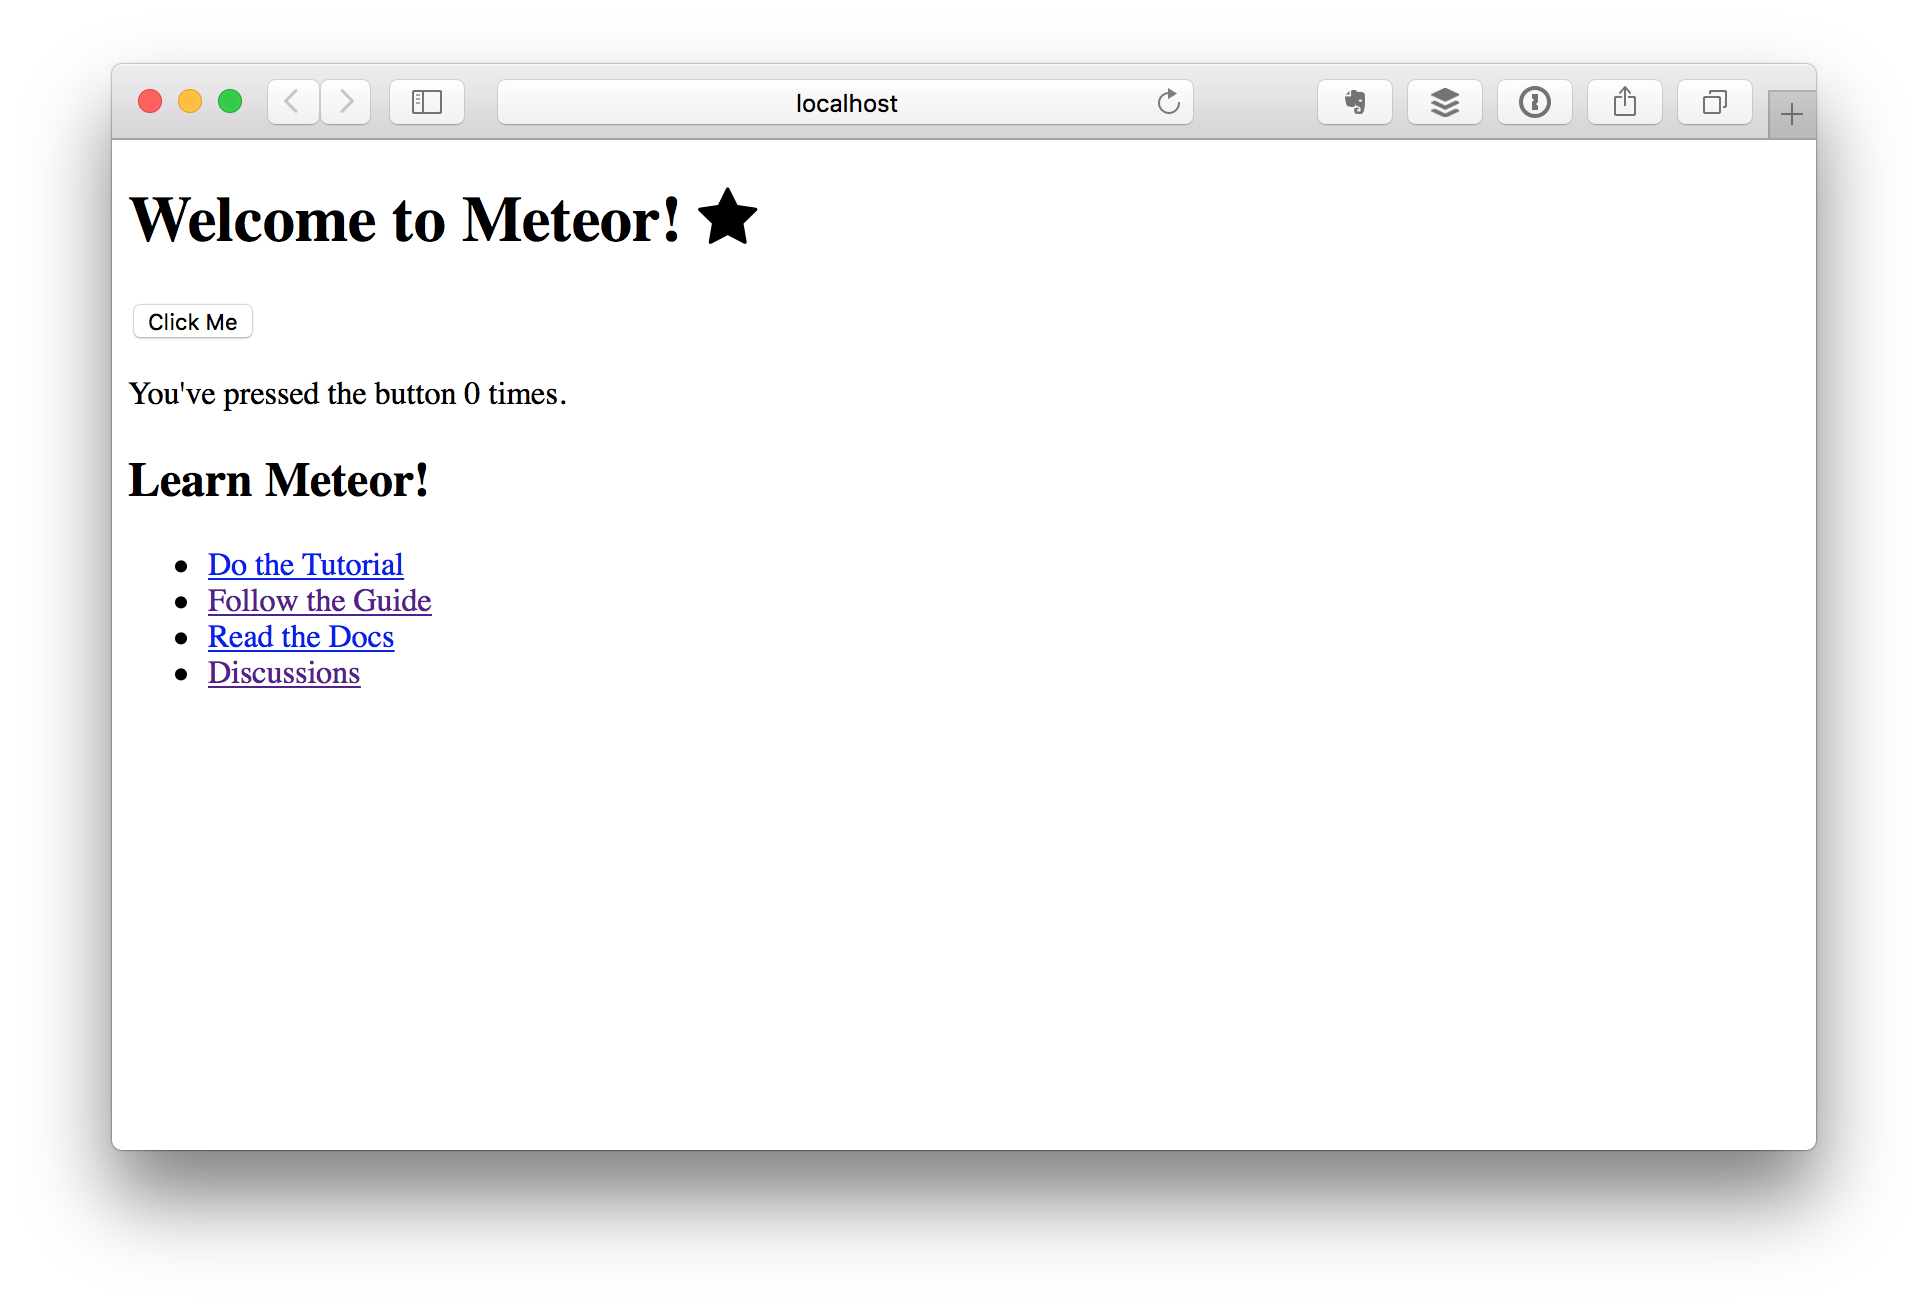 The default Meteor app, now with a star